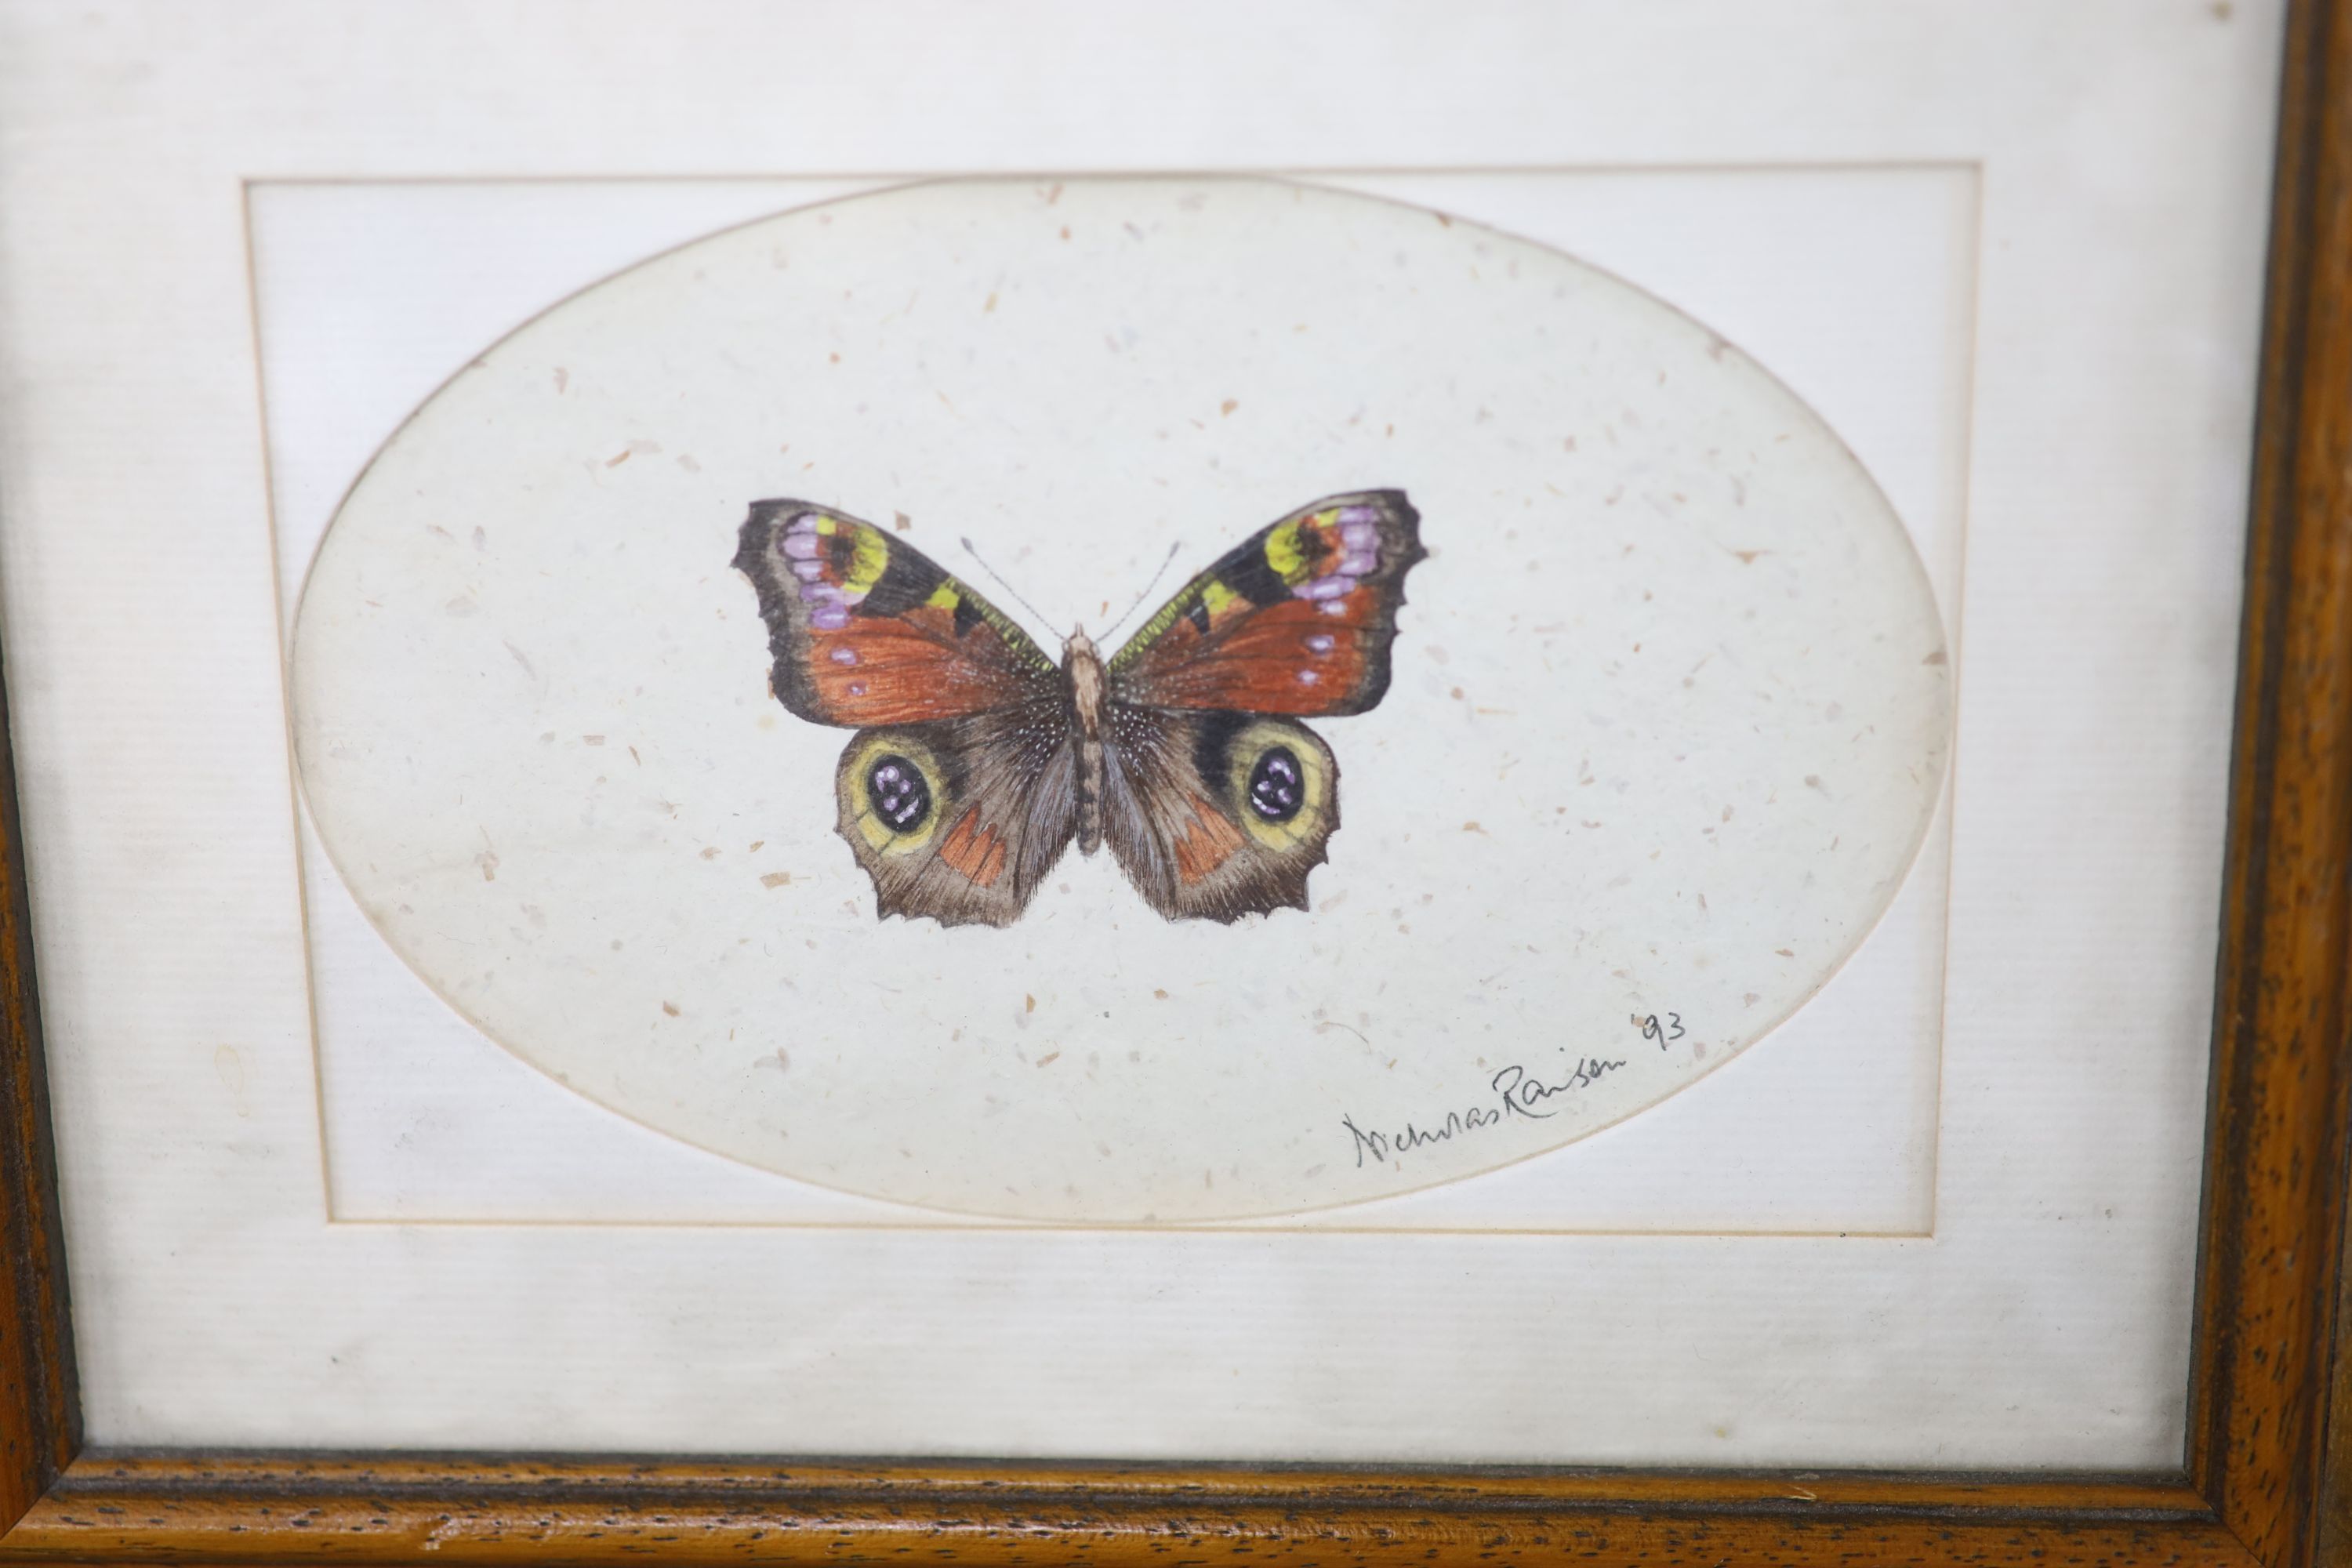 J.Nugent Fitch after B.S.Williams, a set of seven coloured lithographs, Studies of orchids, 29 x 23cm and a small watercolour of a butterfly by Nicholas Raison, 9 x 14.5cm